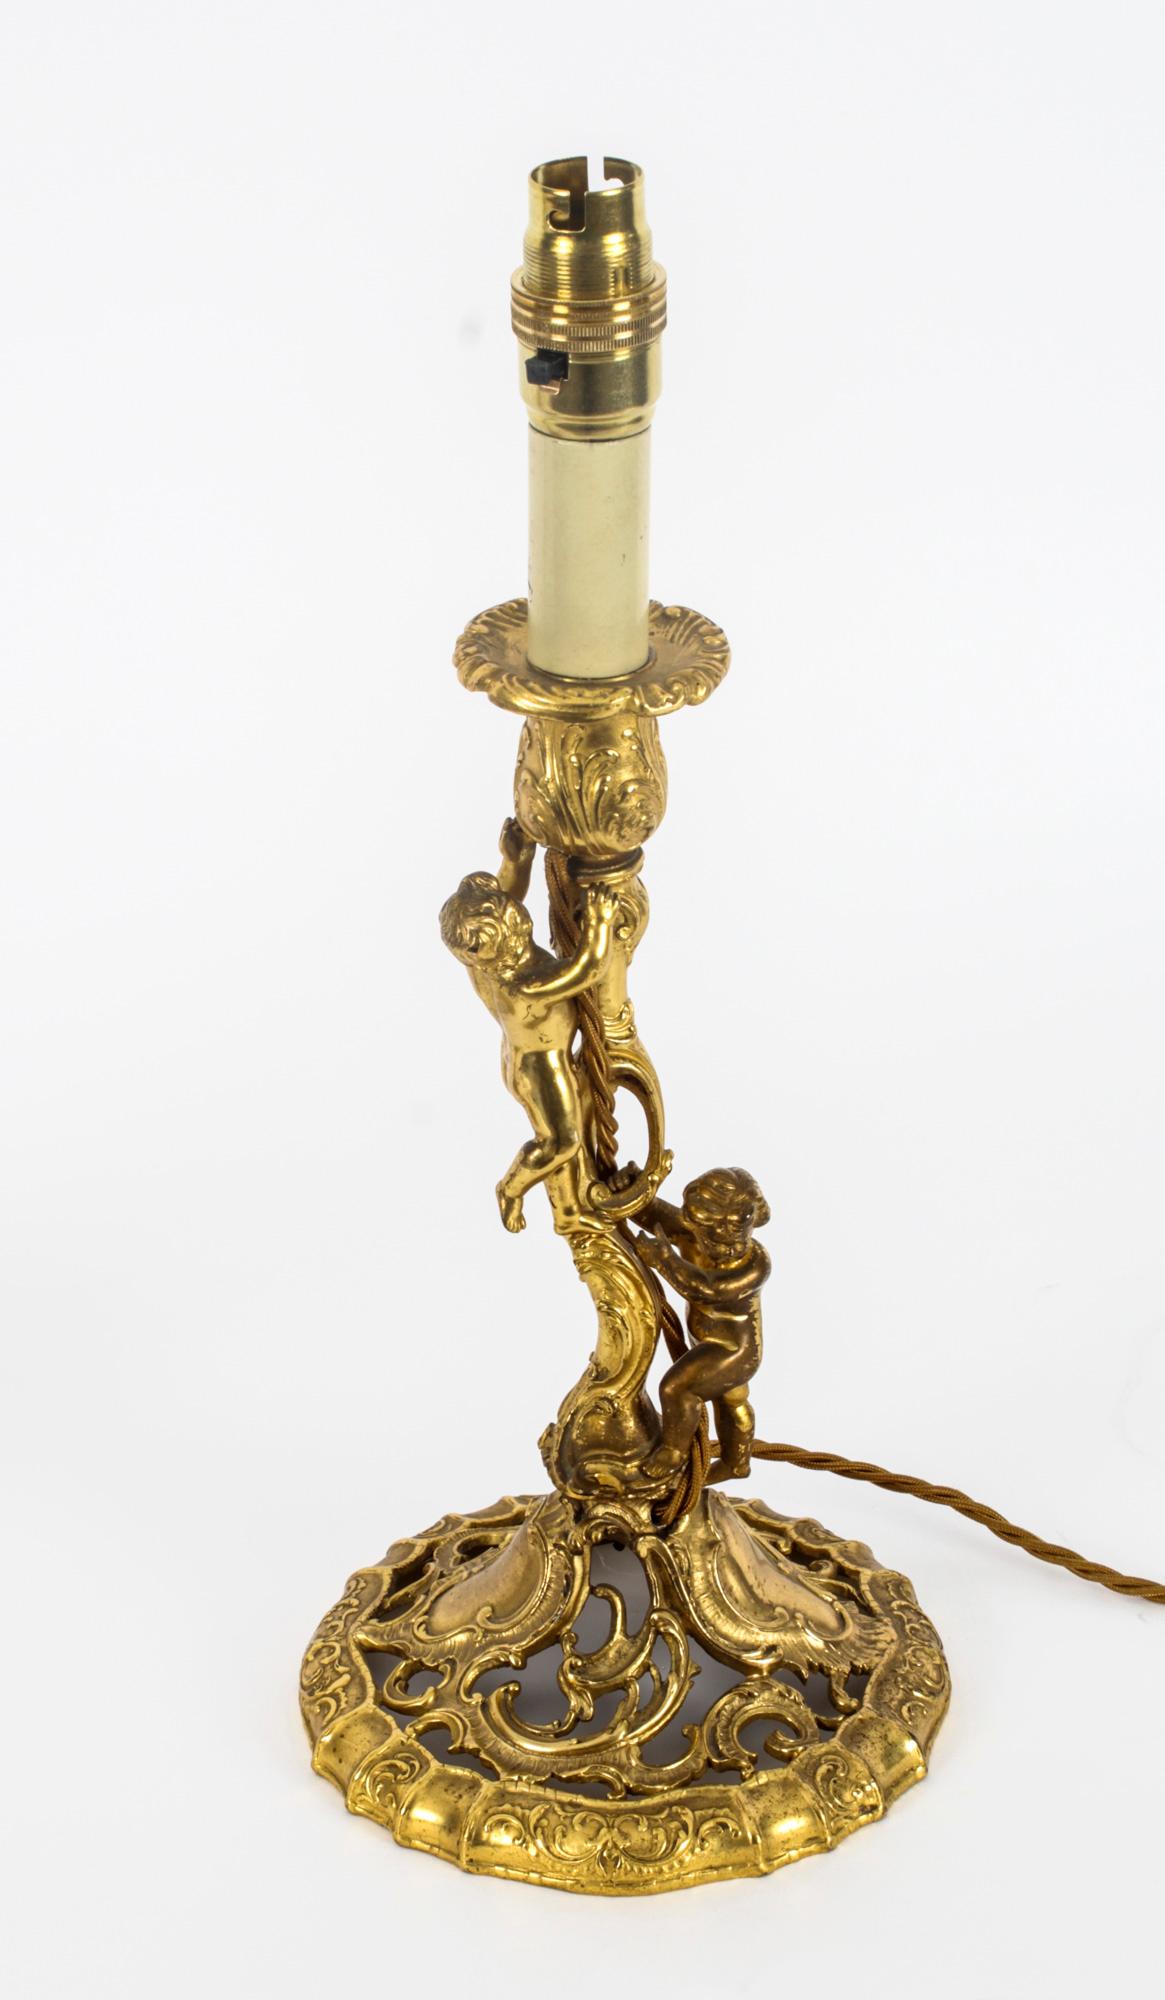 A magnificent antique pair of French ormolu table lamps, Circa 1870 in date. 

Later converted to electricity from 19th Century French ormolu candlesticks. The stems formed as climbing cherubs and rococo decoration upon naturalistically modelled